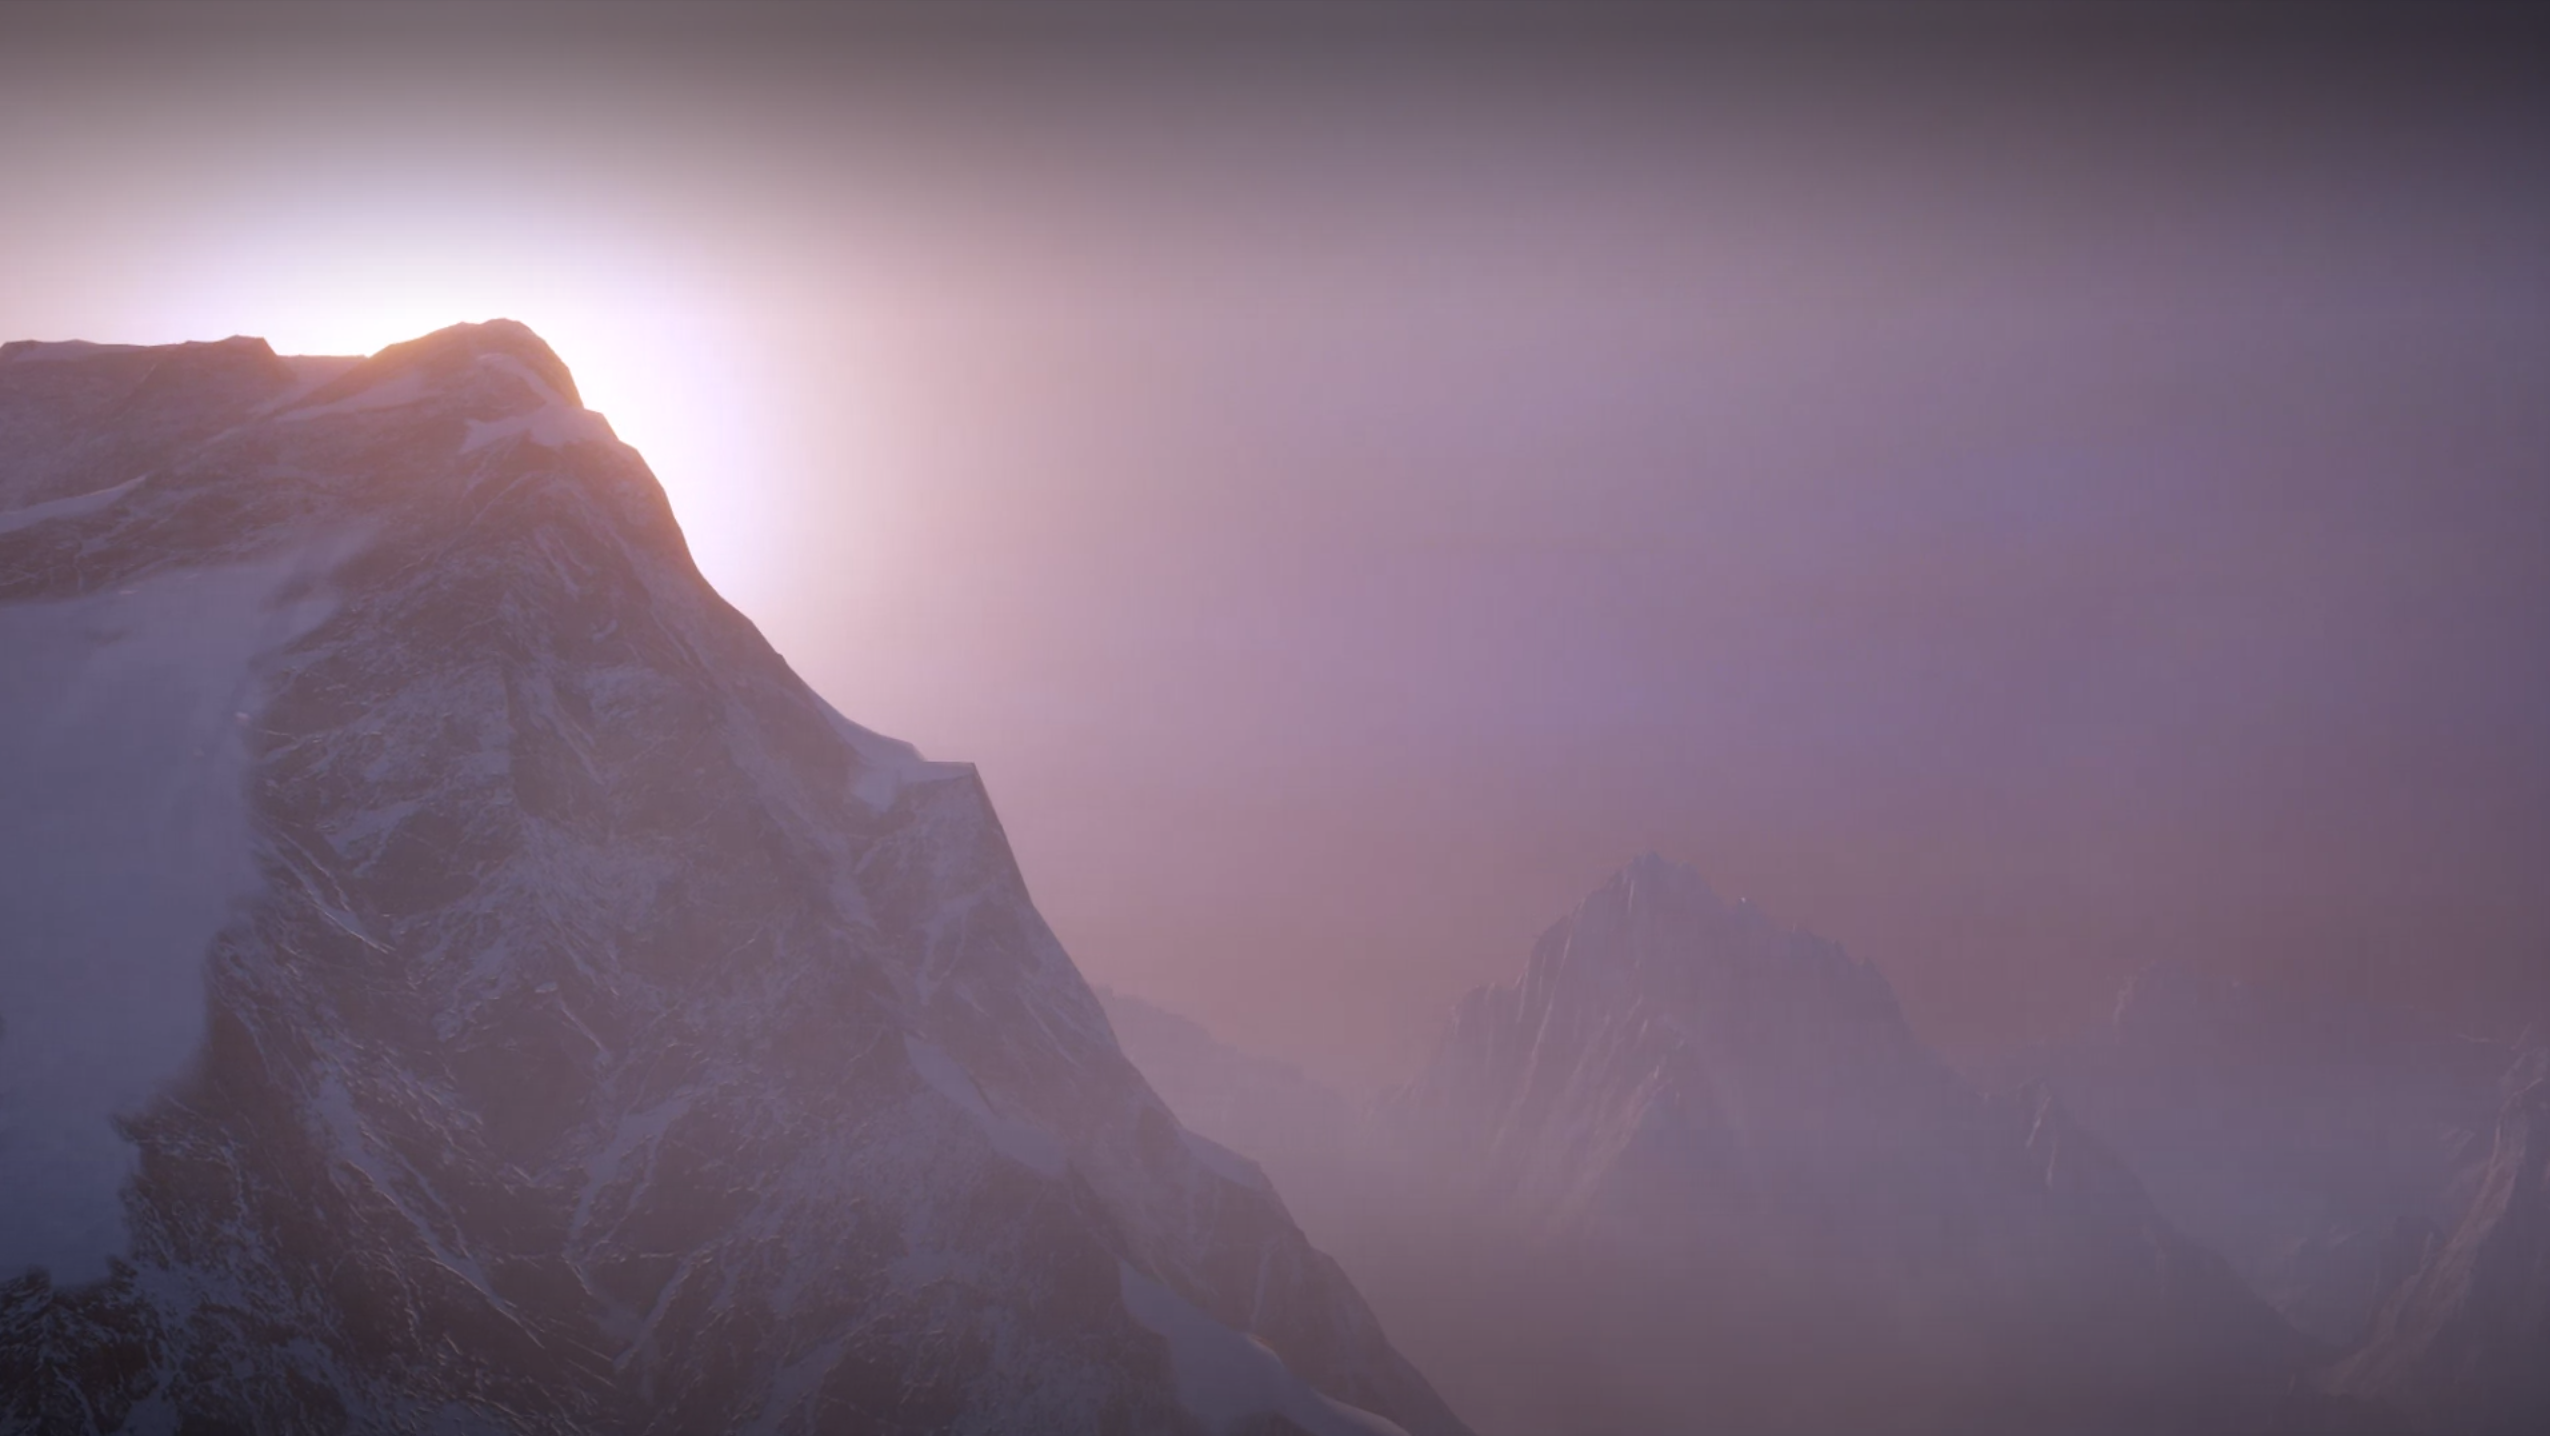 General 2550x1436 Dragon Age landscape pink mountains video games PC gaming Dragon Age: Inquisition screen shot